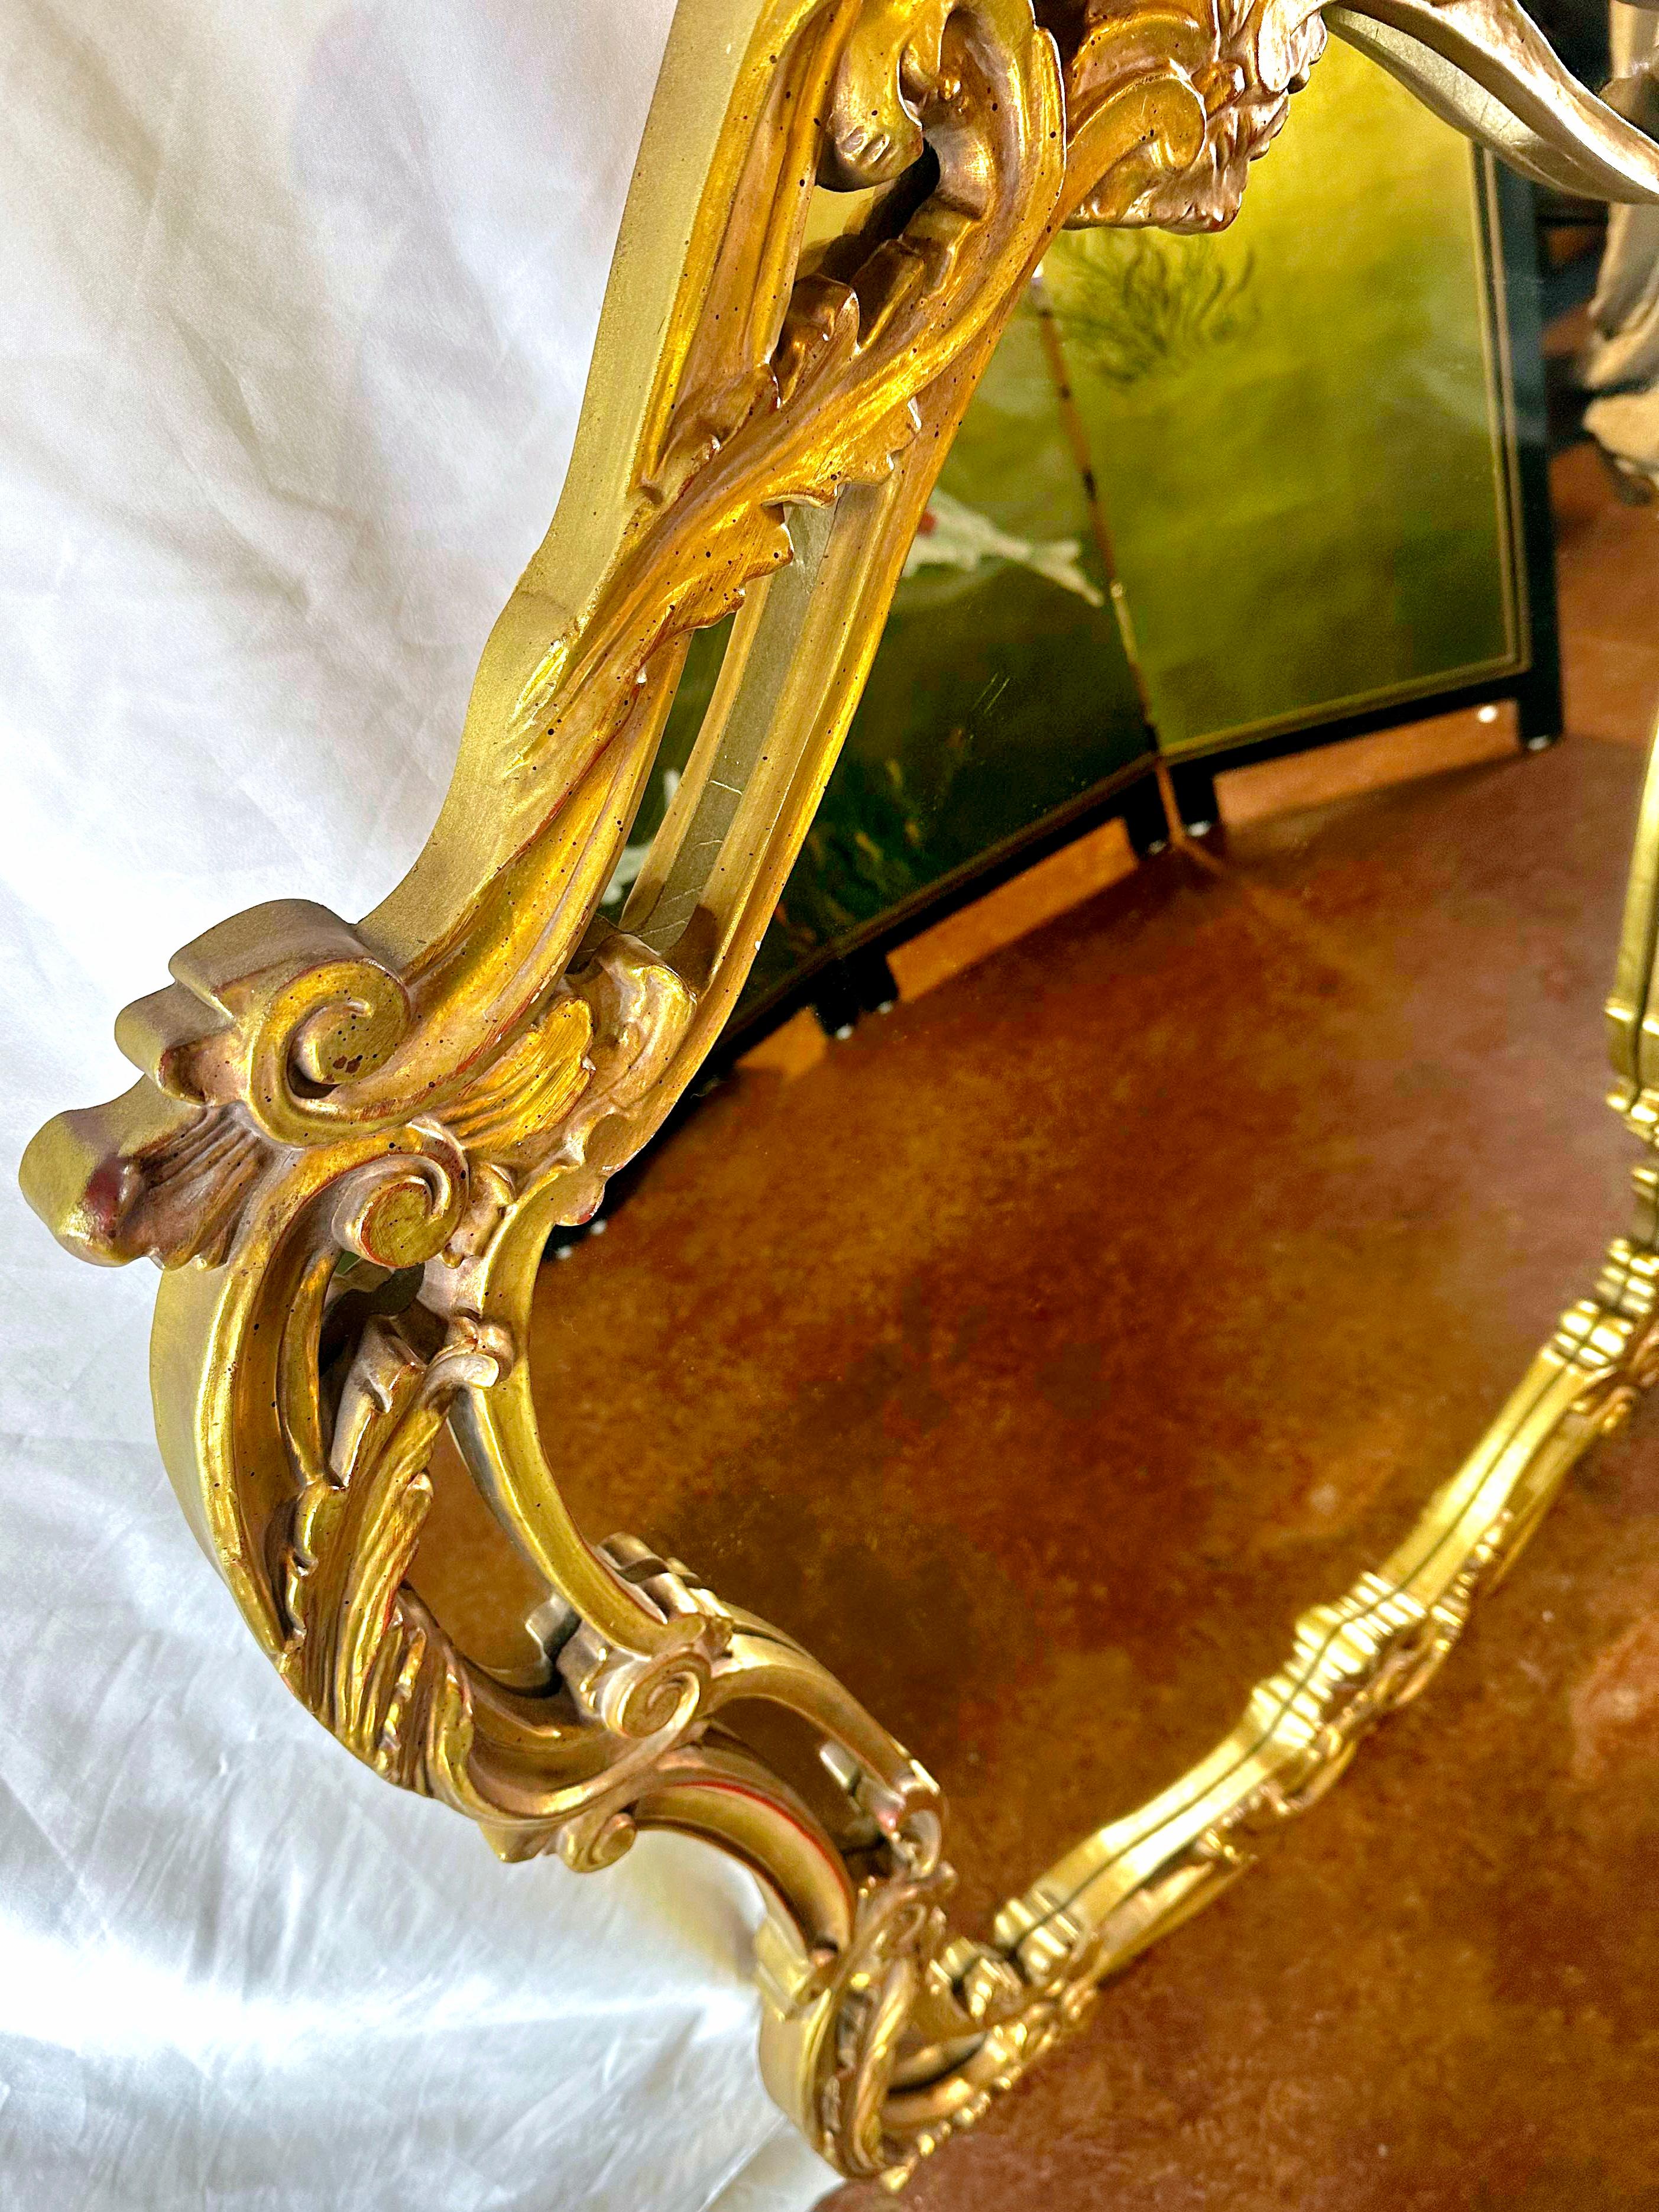 This is the 60-70 year old almost exact twin version of the 150 year old original mirror I have in my listings. 
So I basically have 2 of these.
Same size and details. 
If you're looking for a pair of matching mirrors. 
The very last picture posted